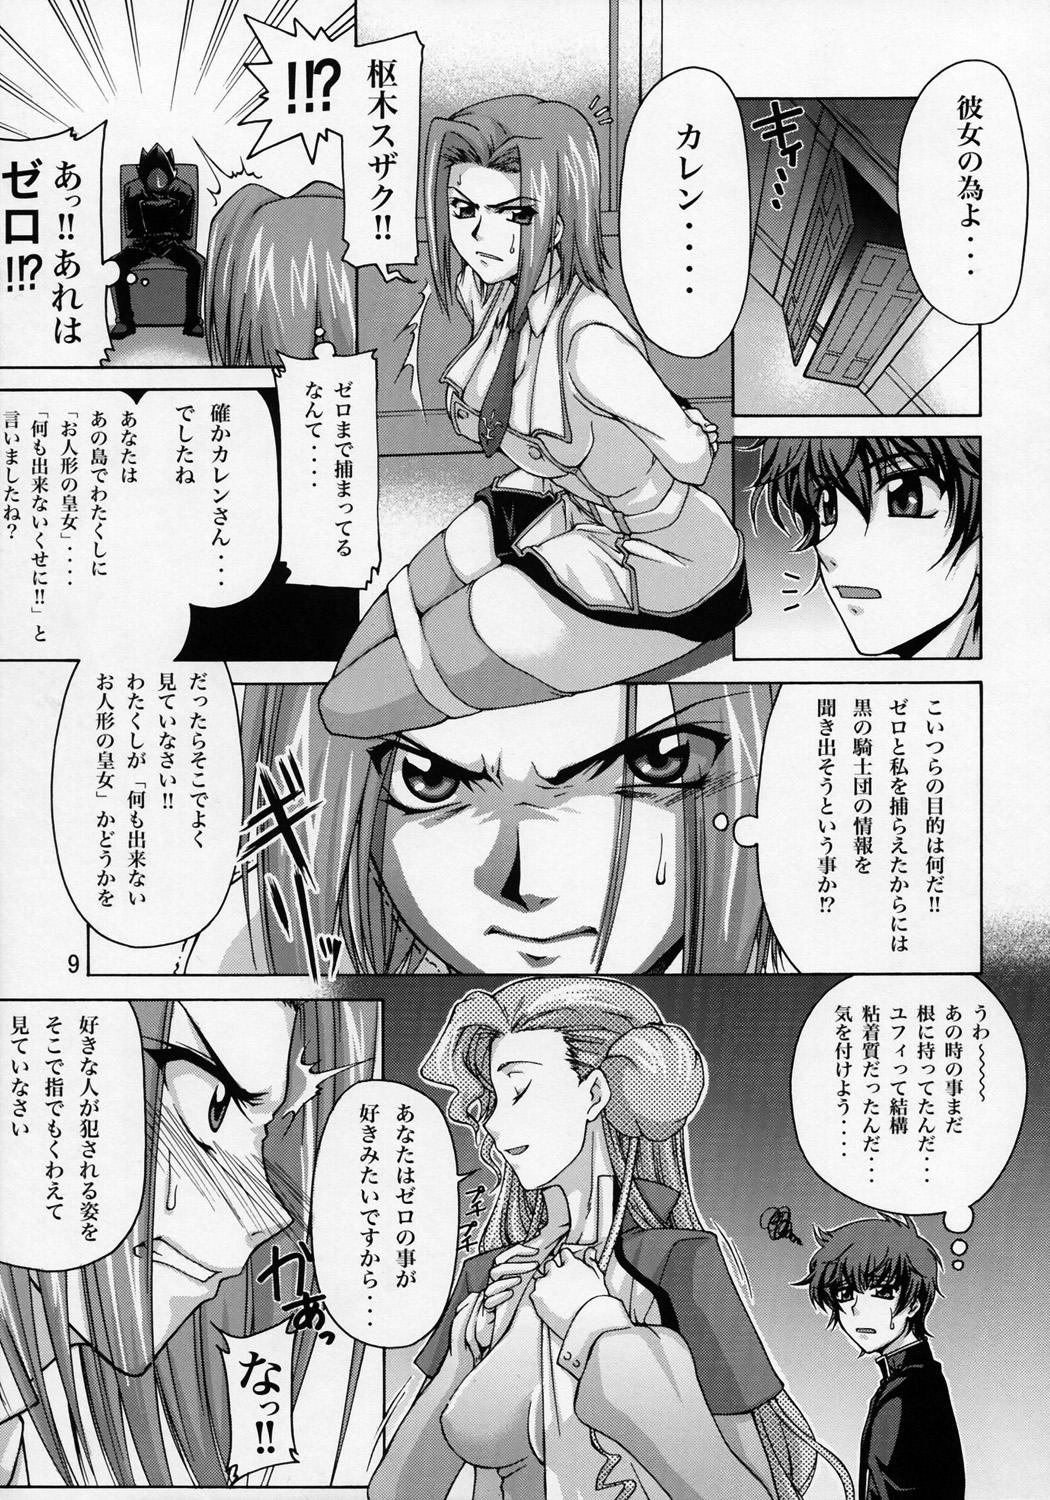 Double CG²R 01 - Code geass Black Gay - Page 8